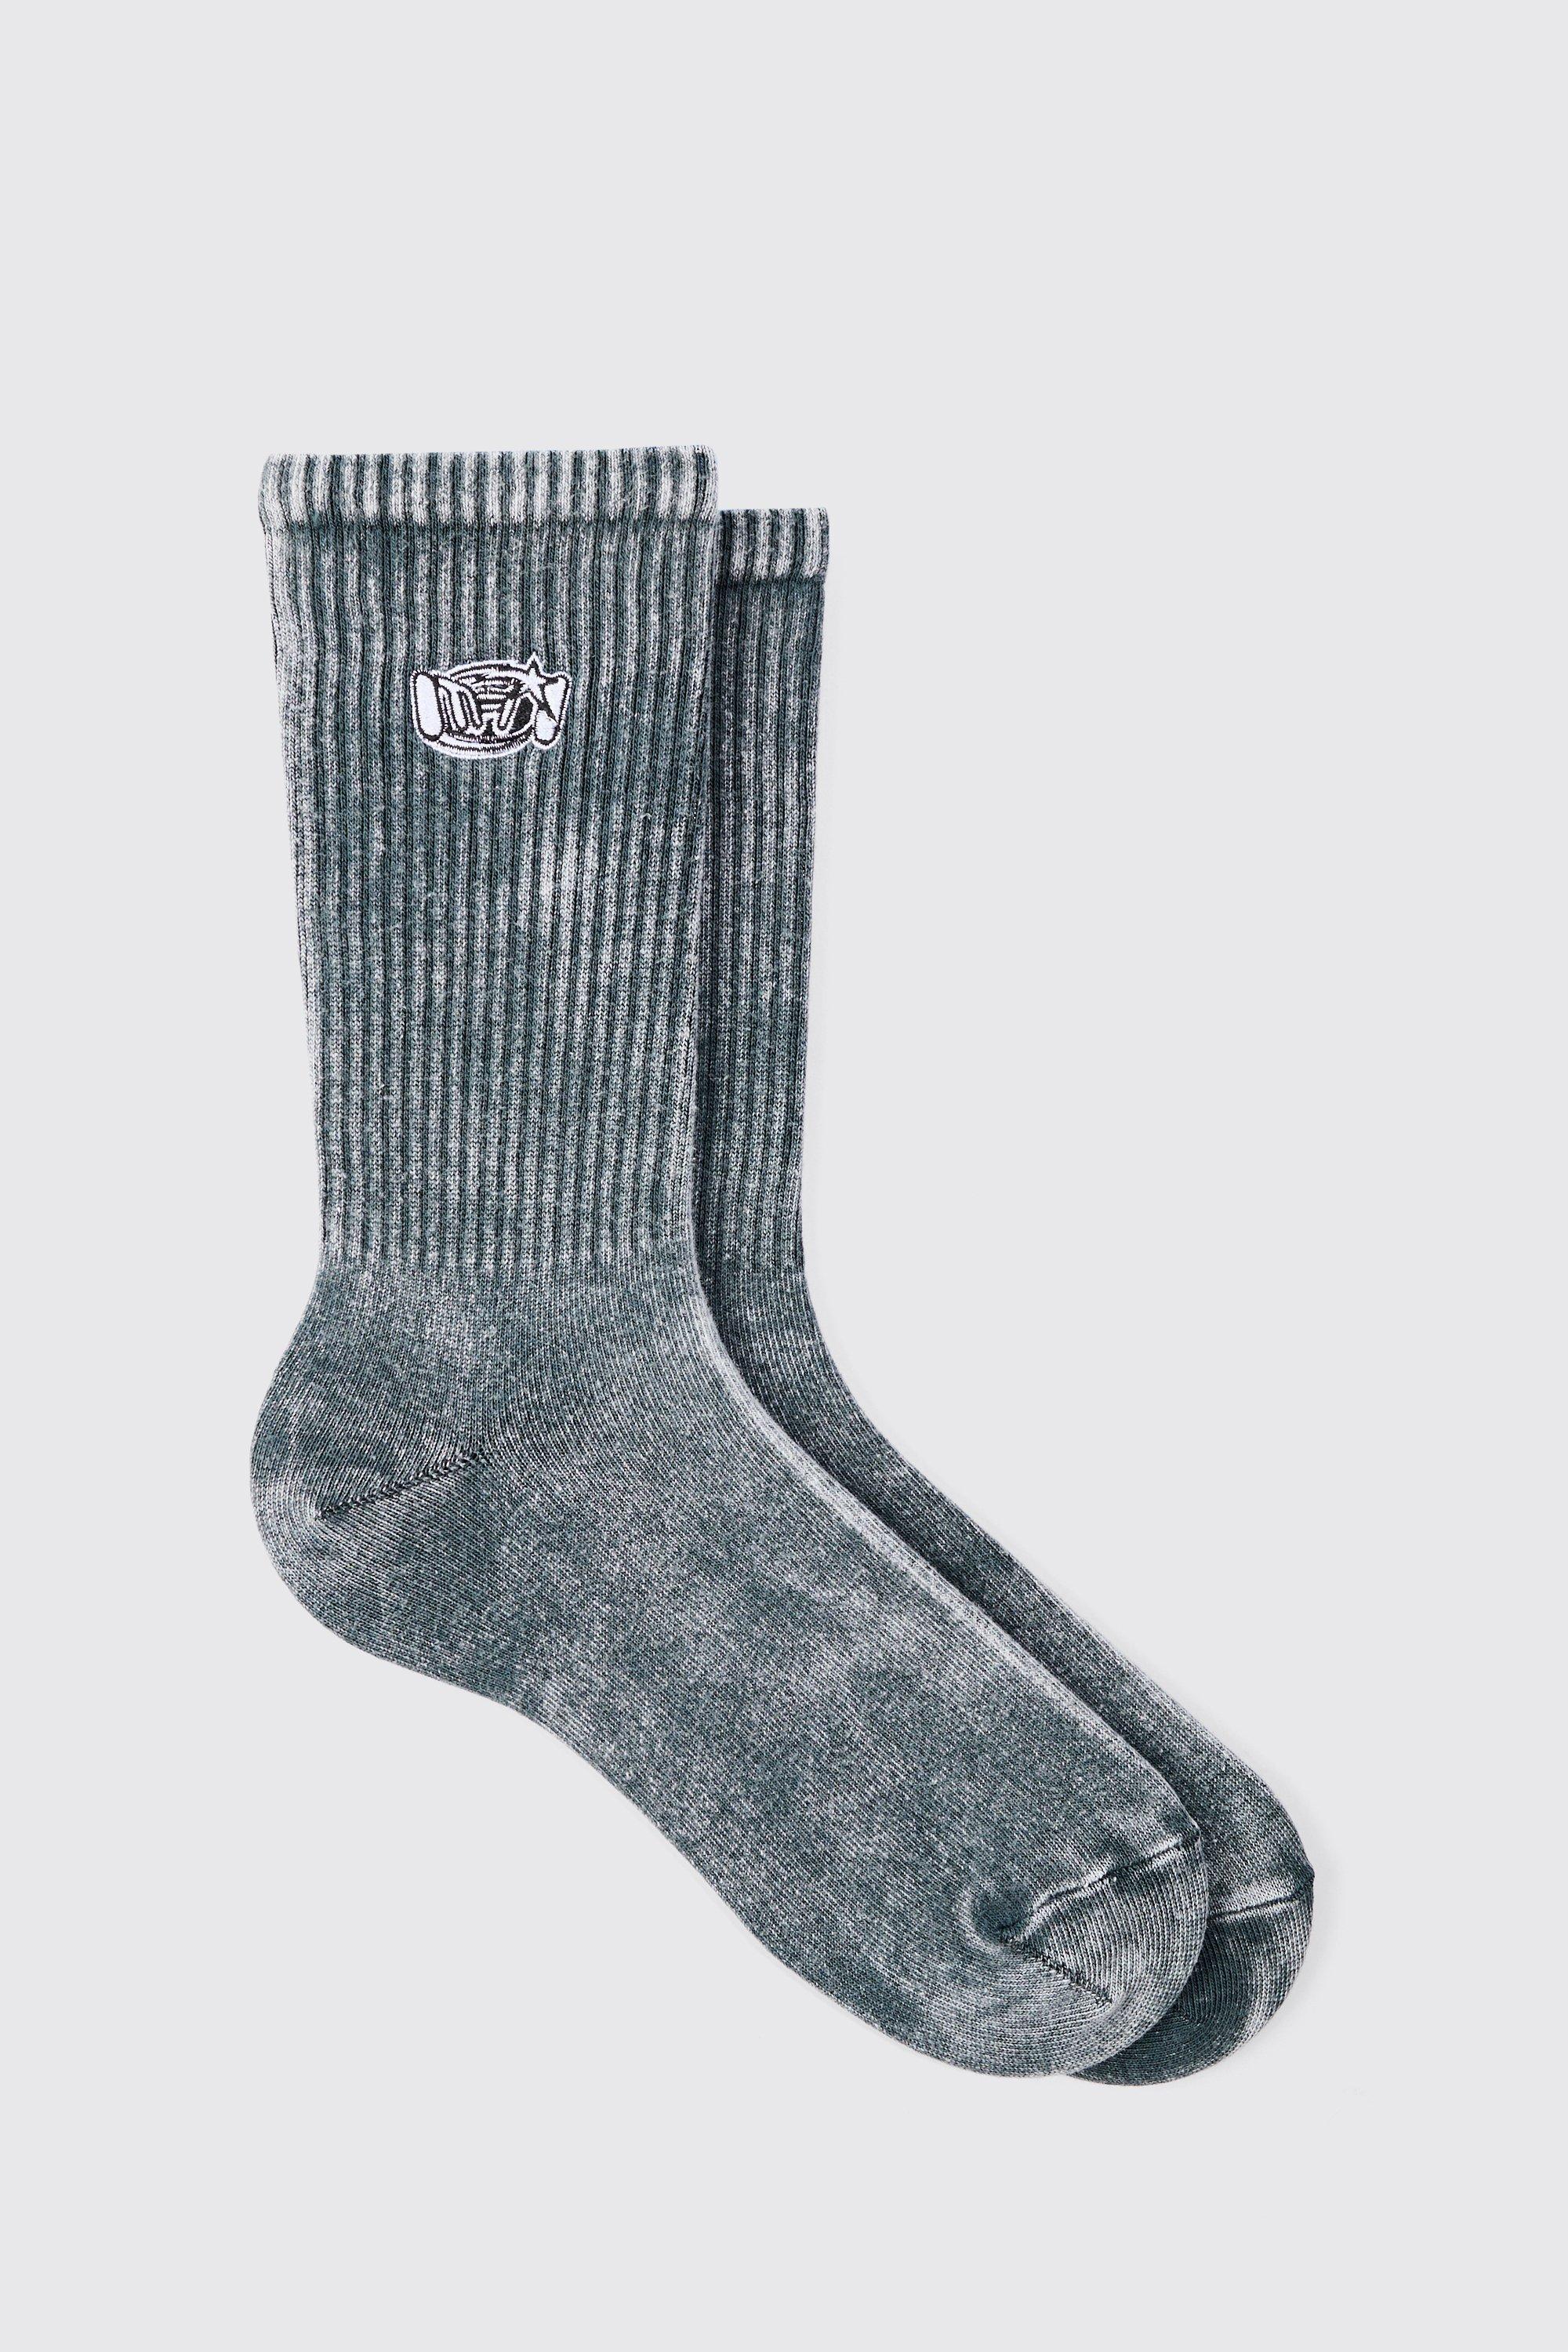 Image of Acid Wash Man Embroidered Socks In Charcoal, Grigio